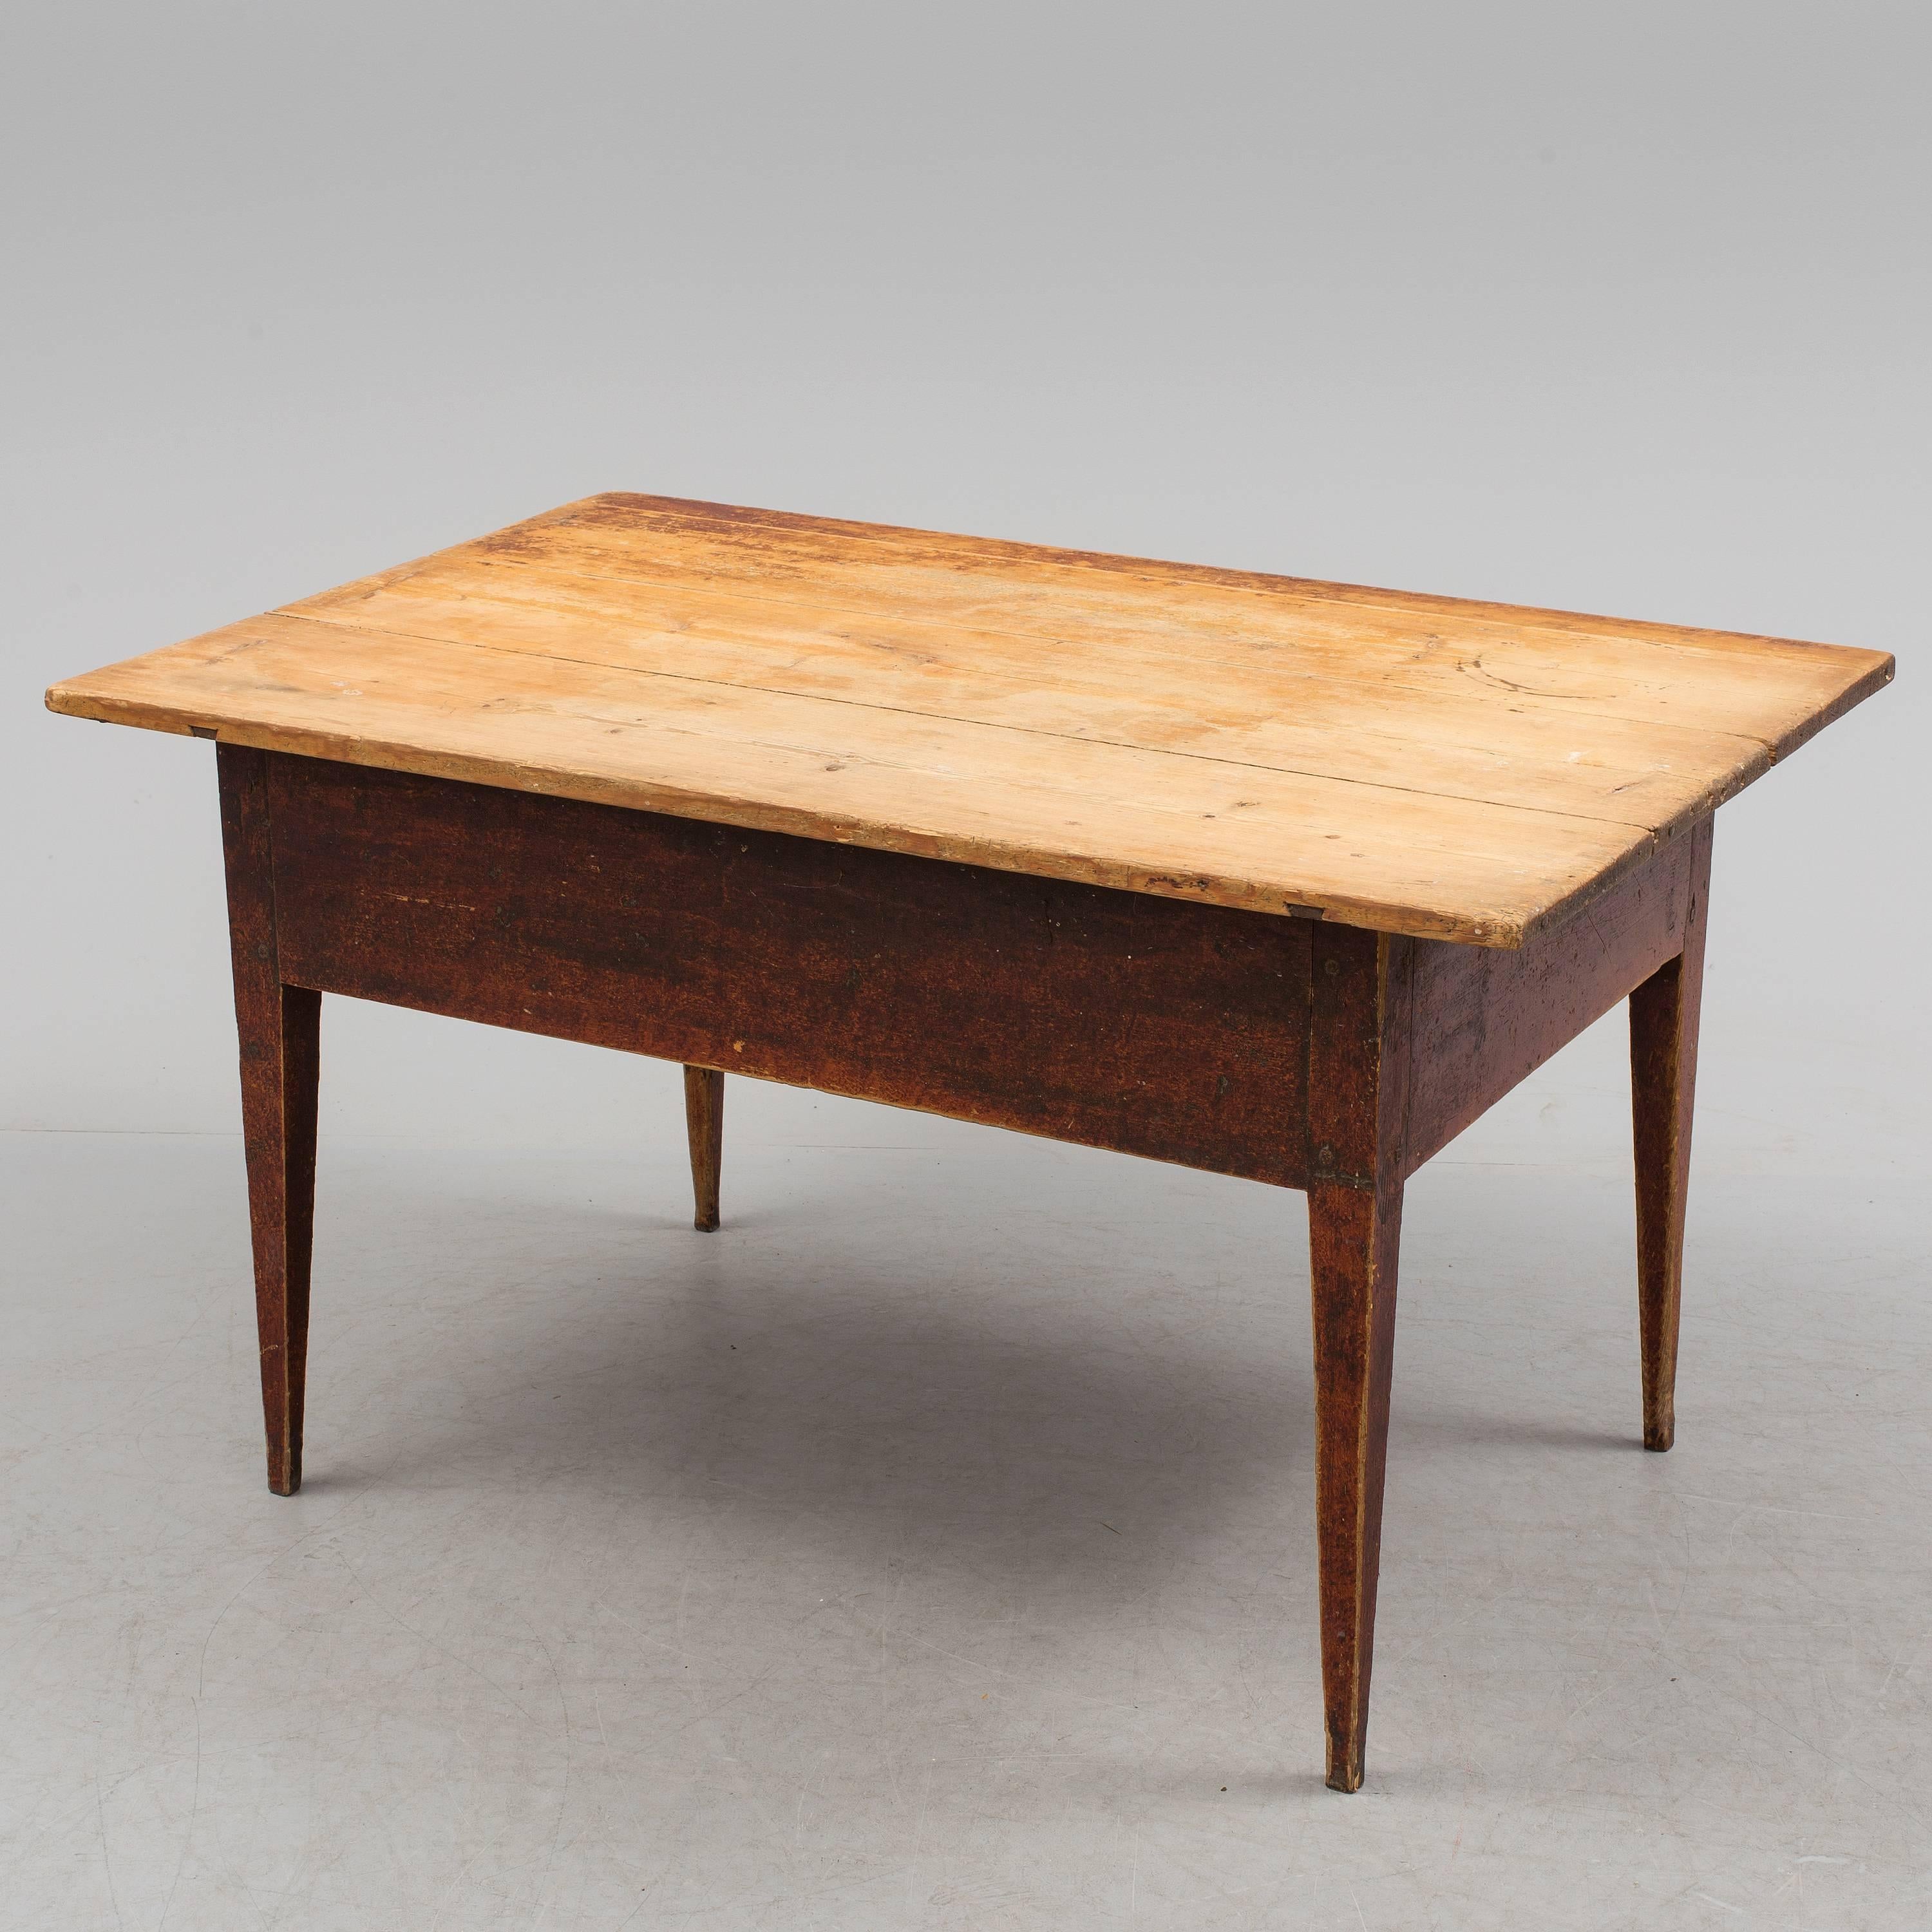 Swedish Folk Art Table, 18th Century In Good Condition For Sale In Madrid, ES